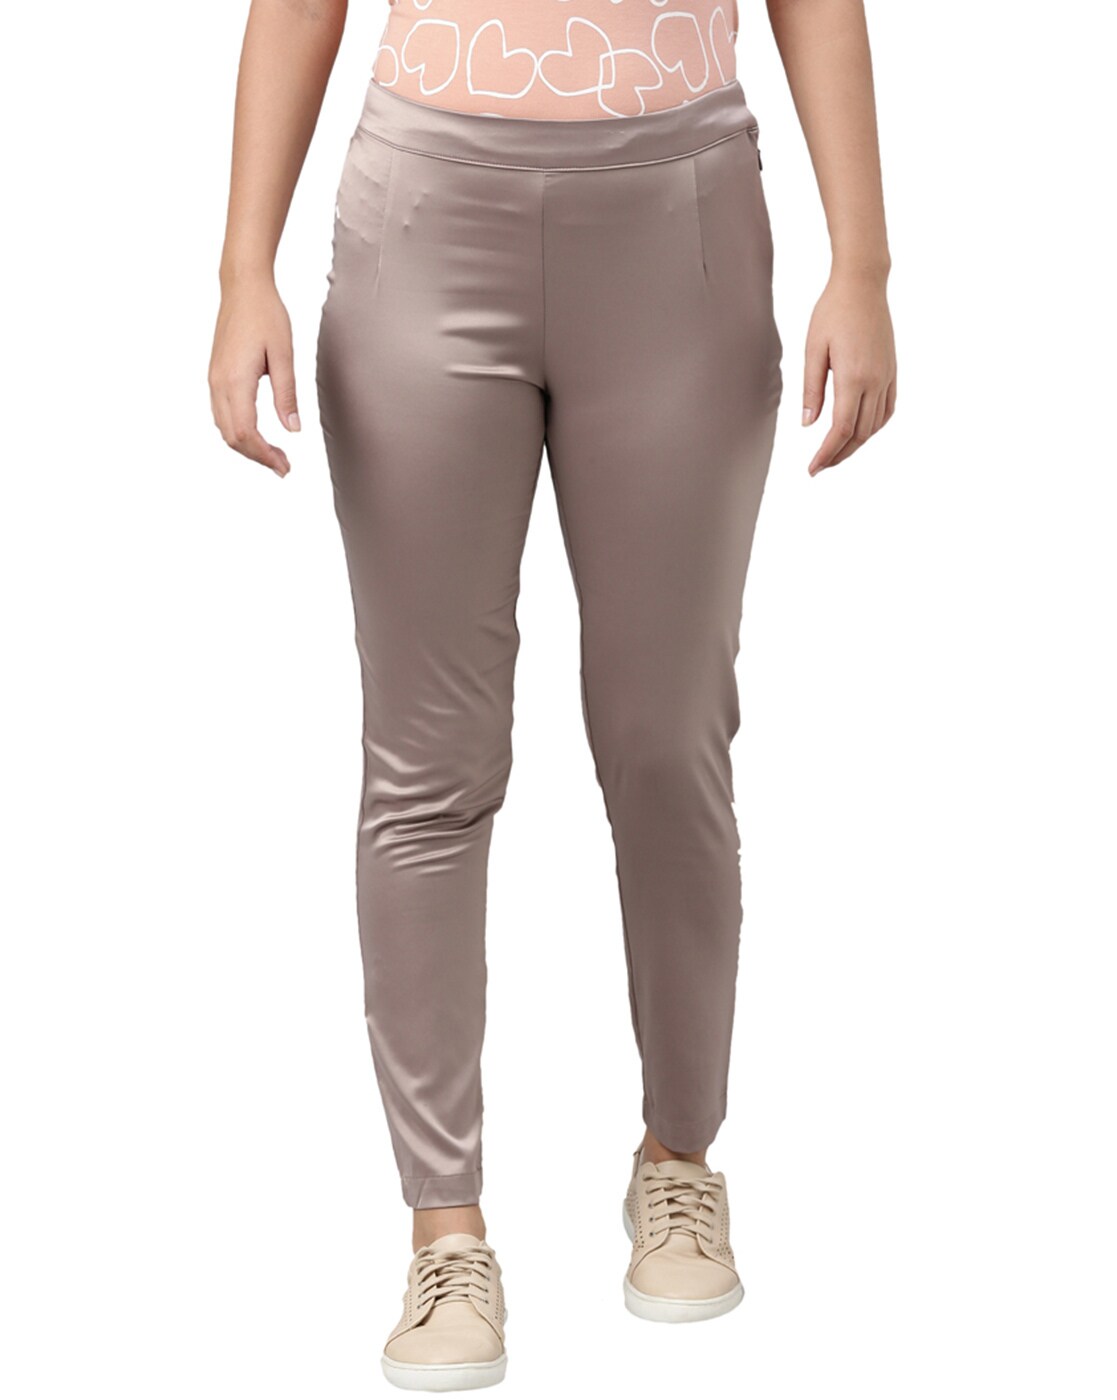 CU COPPER SLIM Copper Slim High Waisted Activewear Pants - Womens India